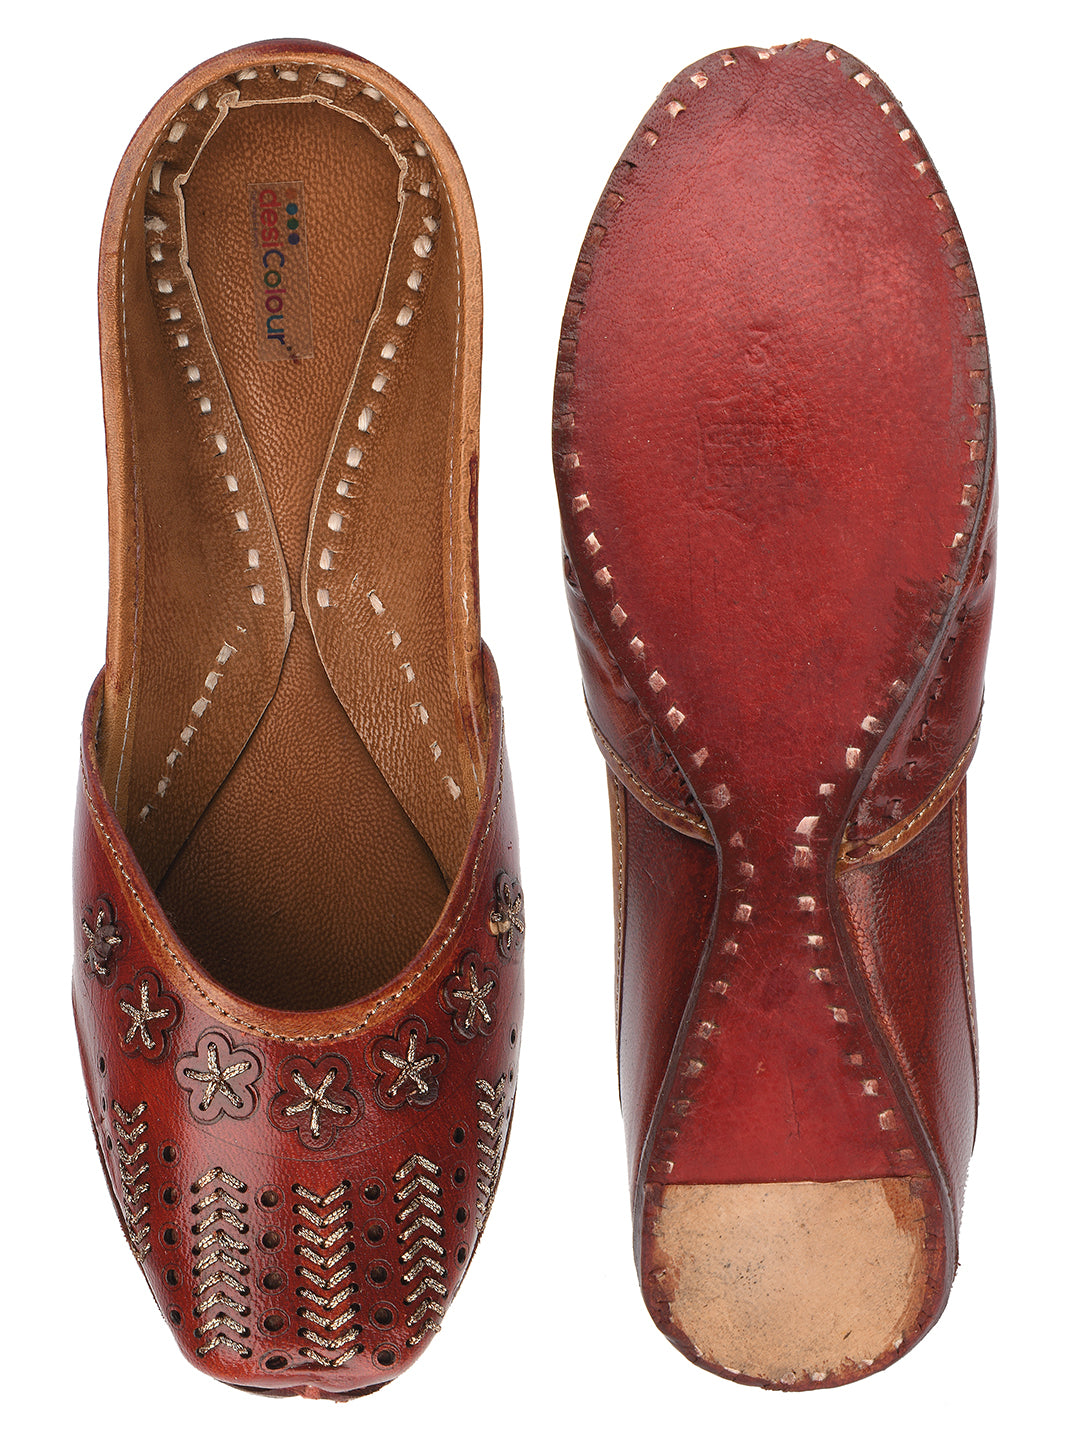 DESI COLOUR Women Tan Embellished Leather Ethnic Mojaris with Laser Cuts Flats